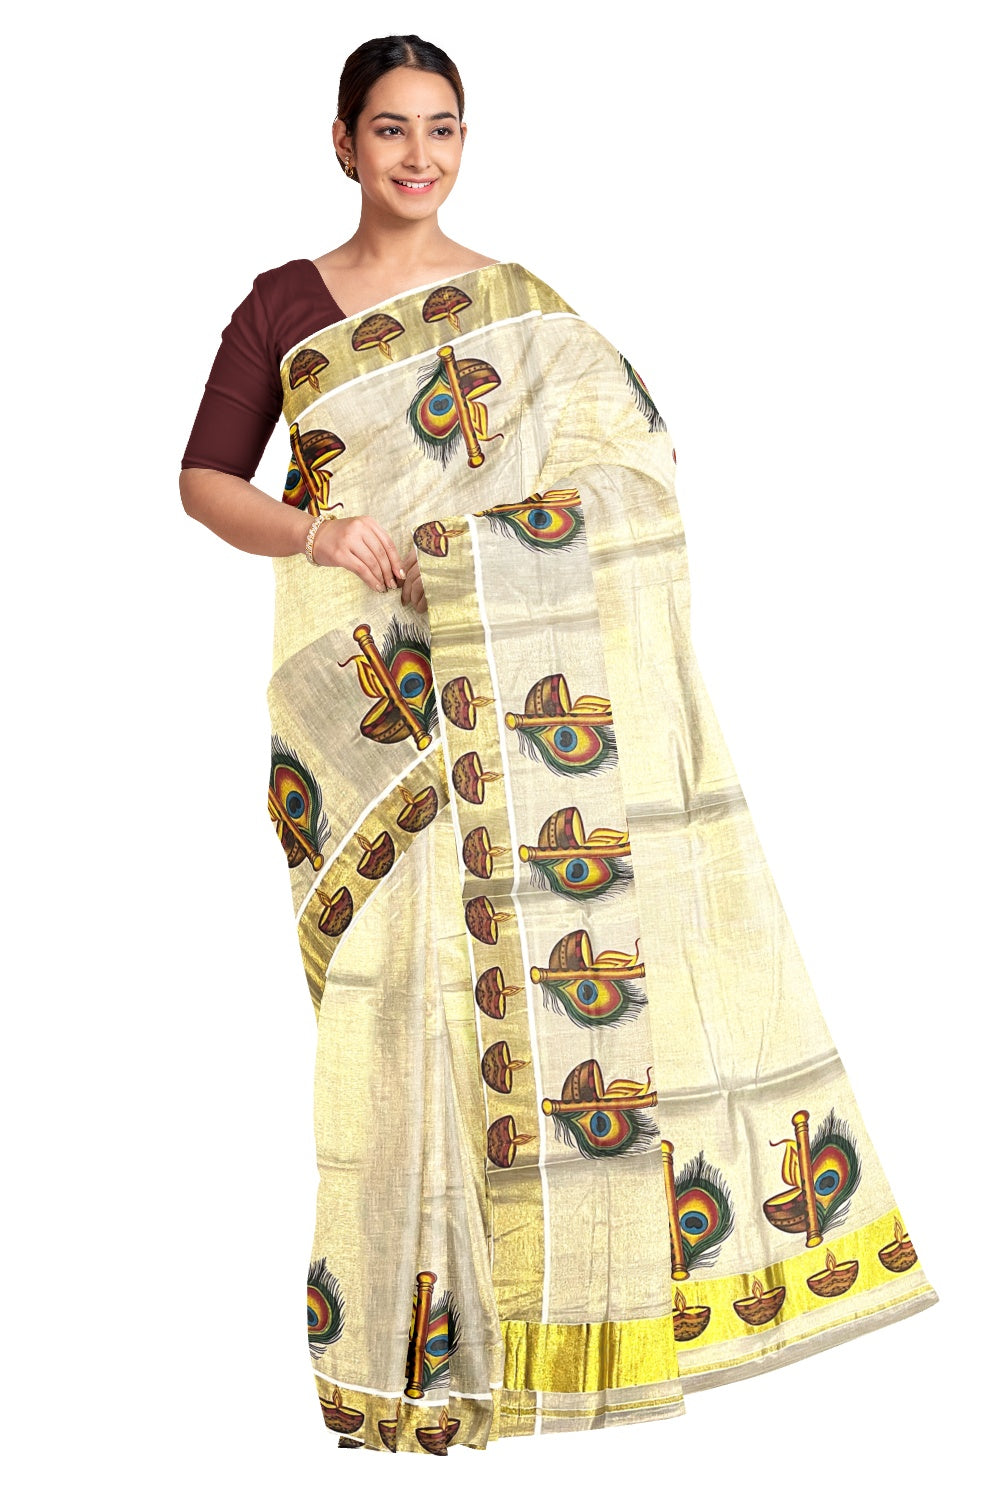 Kerala Tissue Kasavu Saree With Mural Printed Feather and Flute Designs on Border